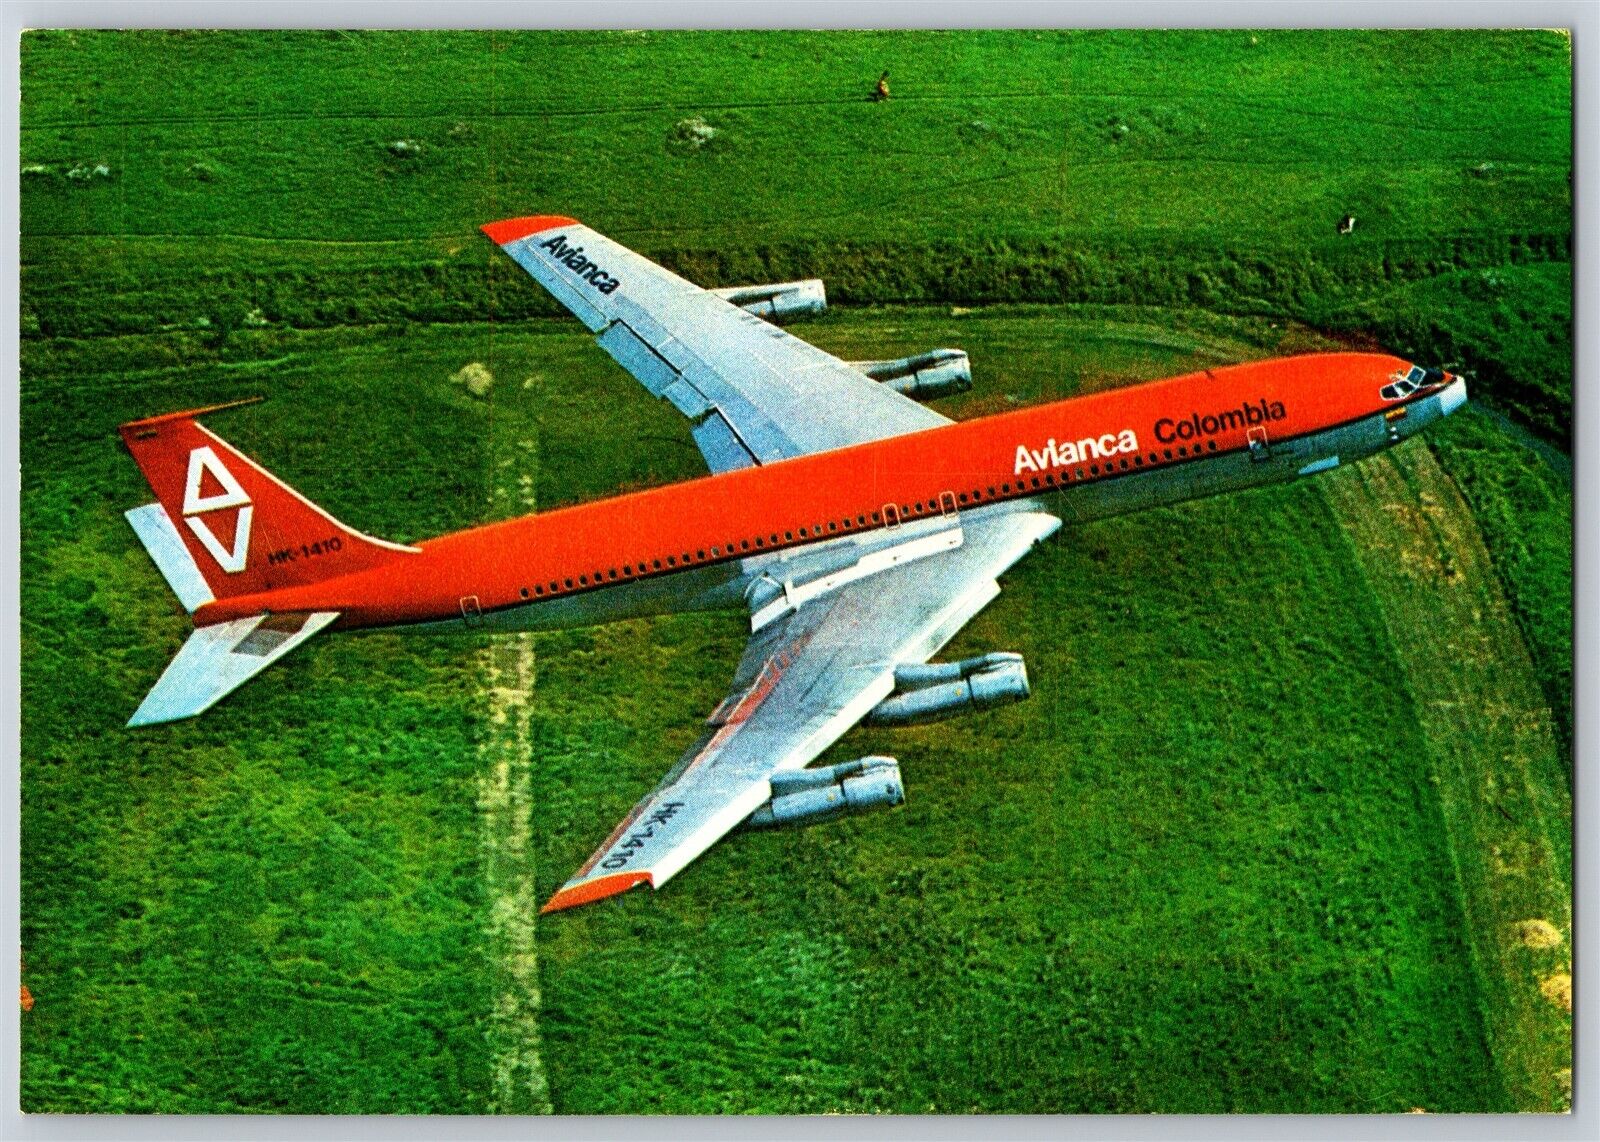 Airplane Postcard Avianca Colombia Airlines Boeing 707 Movifoto Hk-1410 BJ1